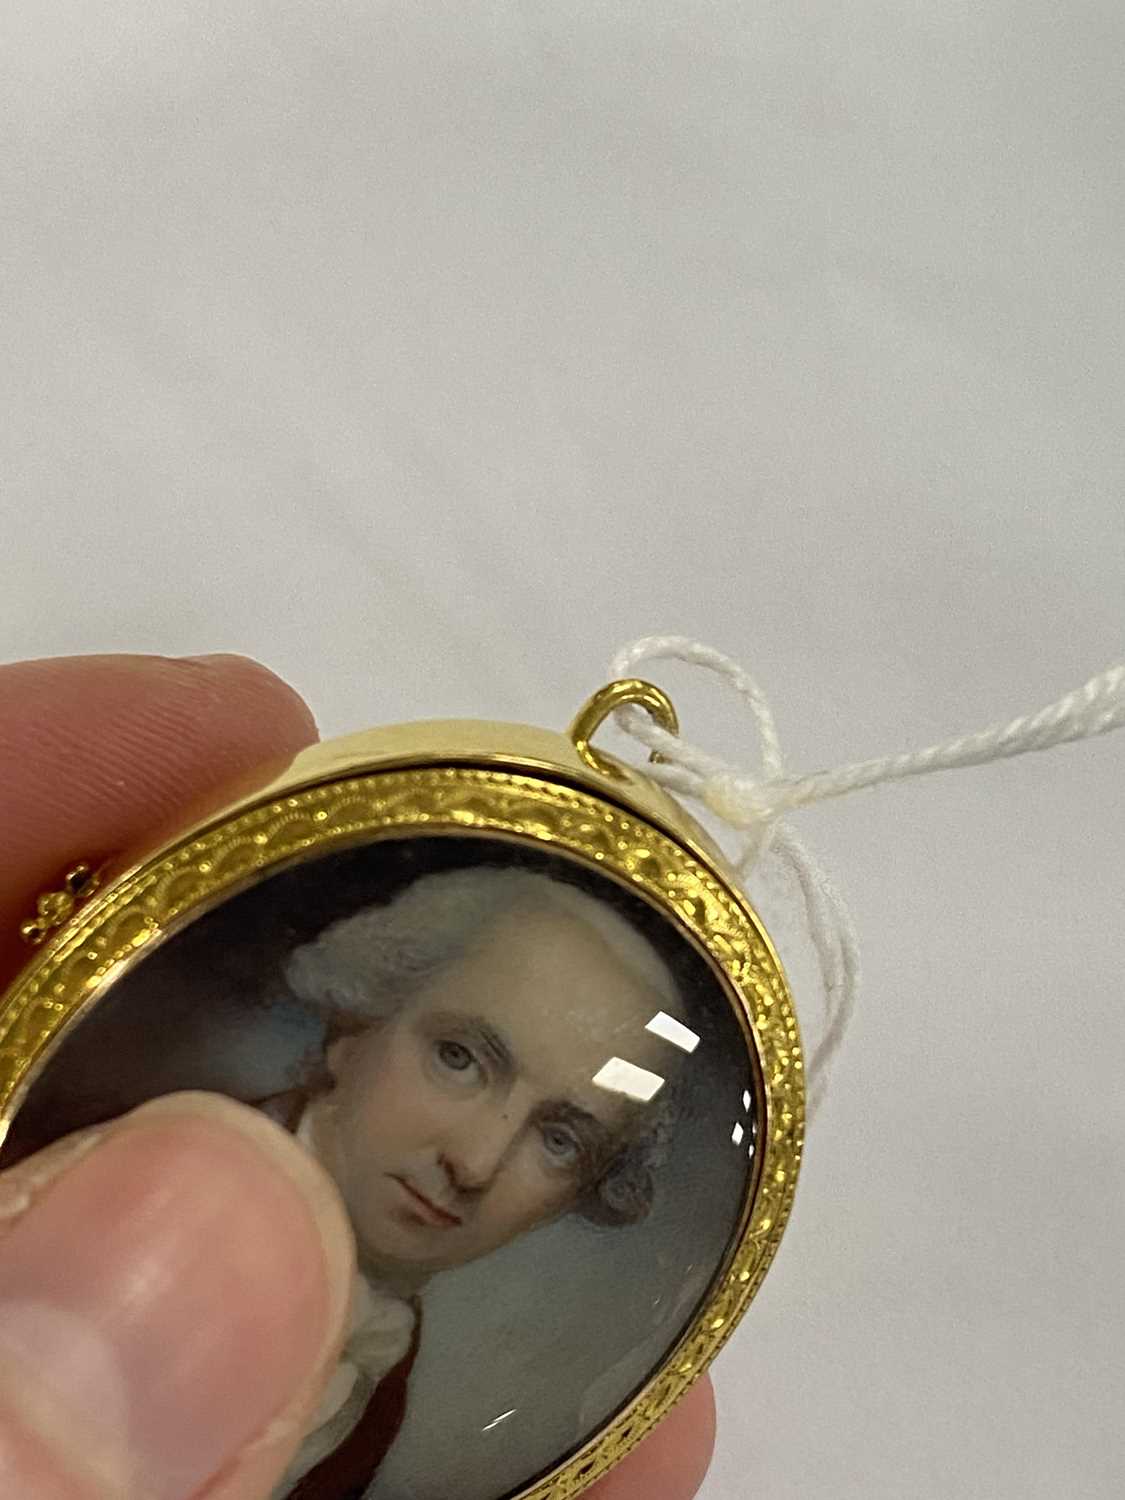 An early 19th century ivory miniature brooch / pendant - Image 2 of 5